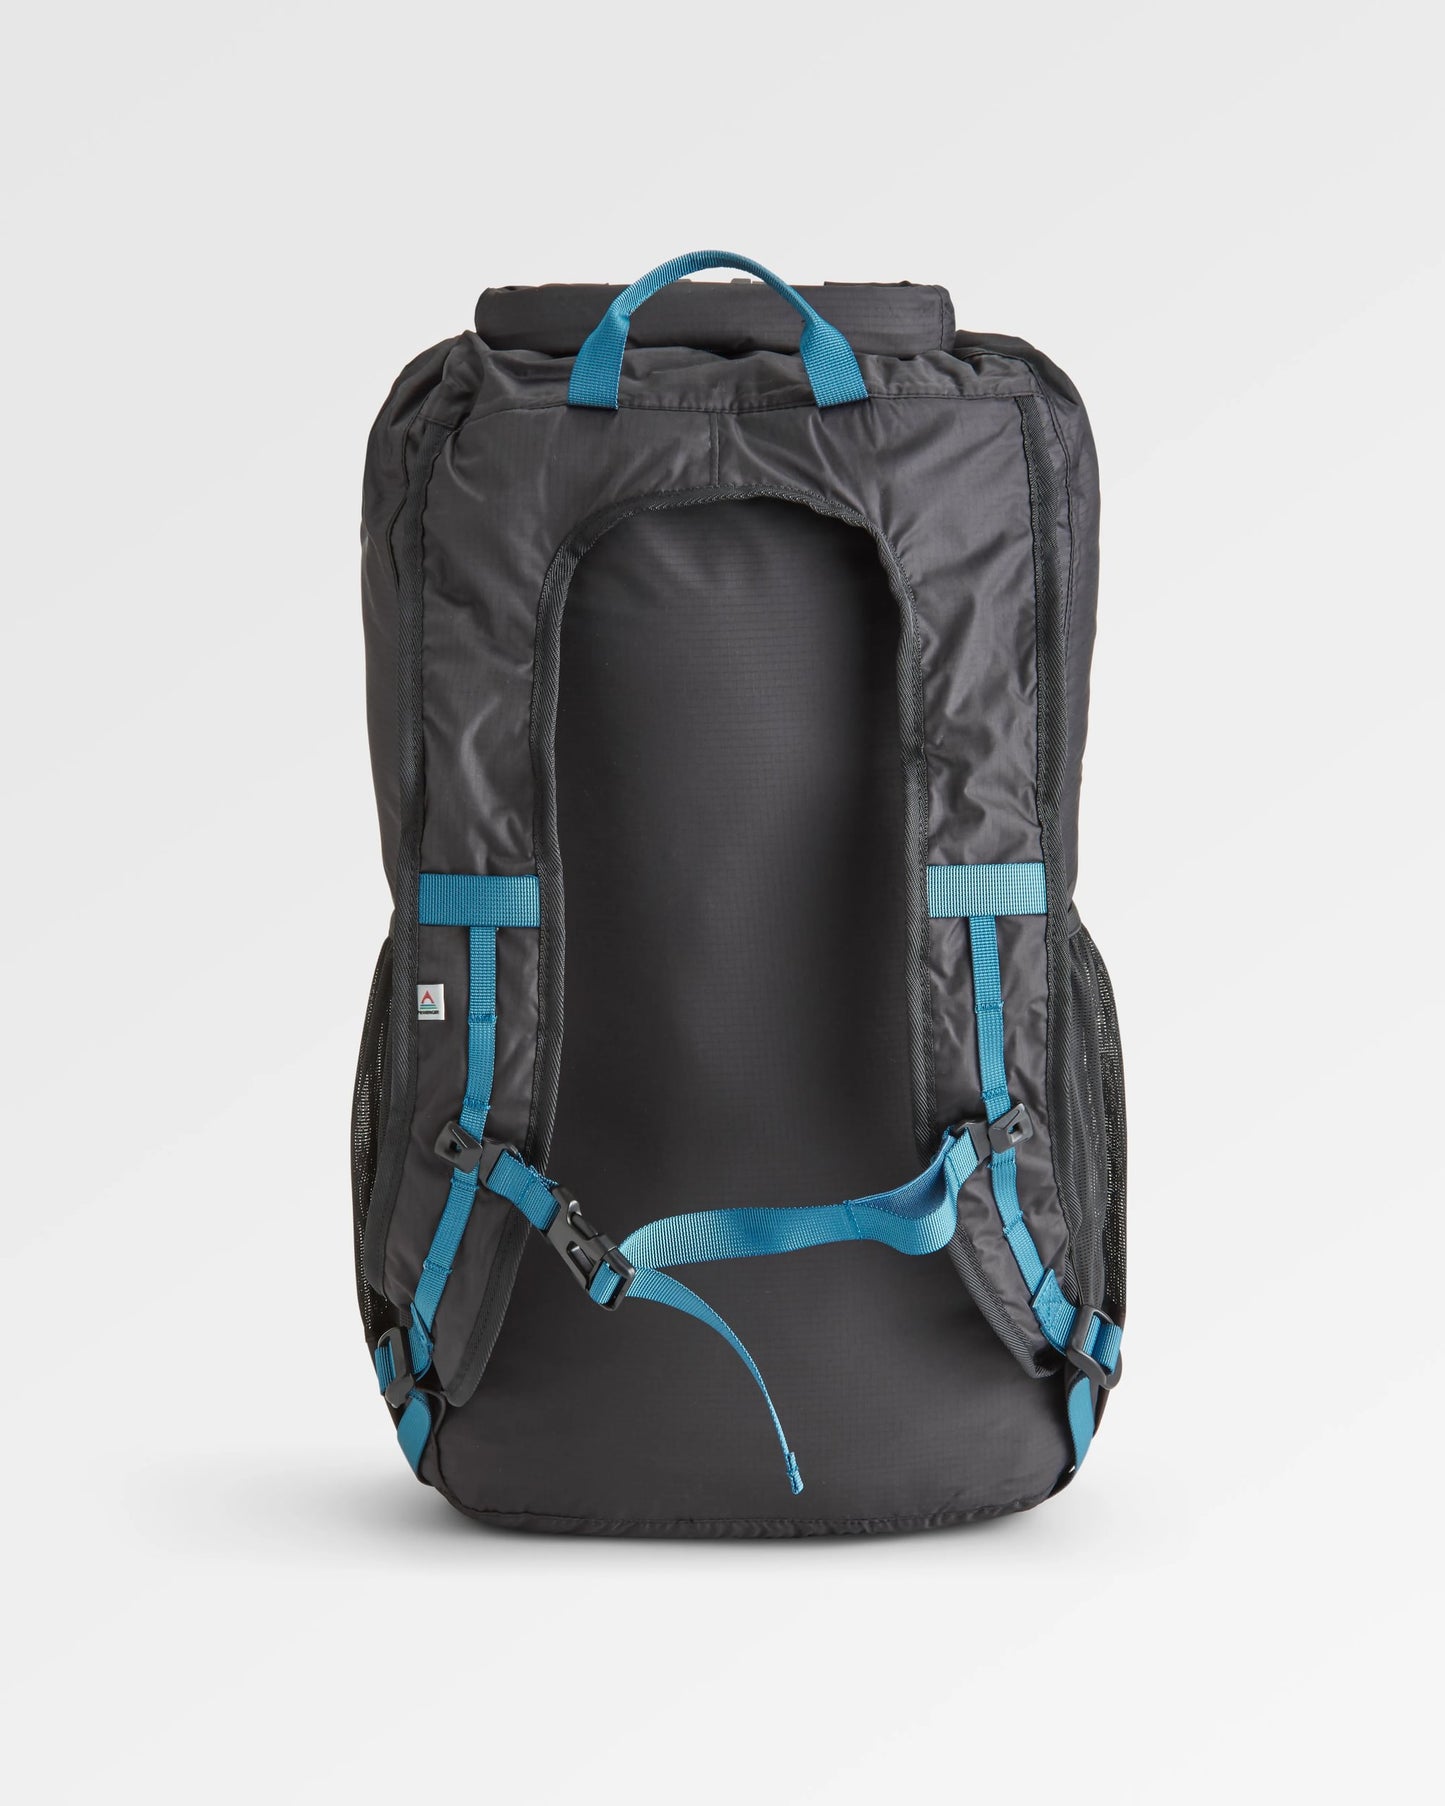 Trail Light Recycled Packable Backpack - Black